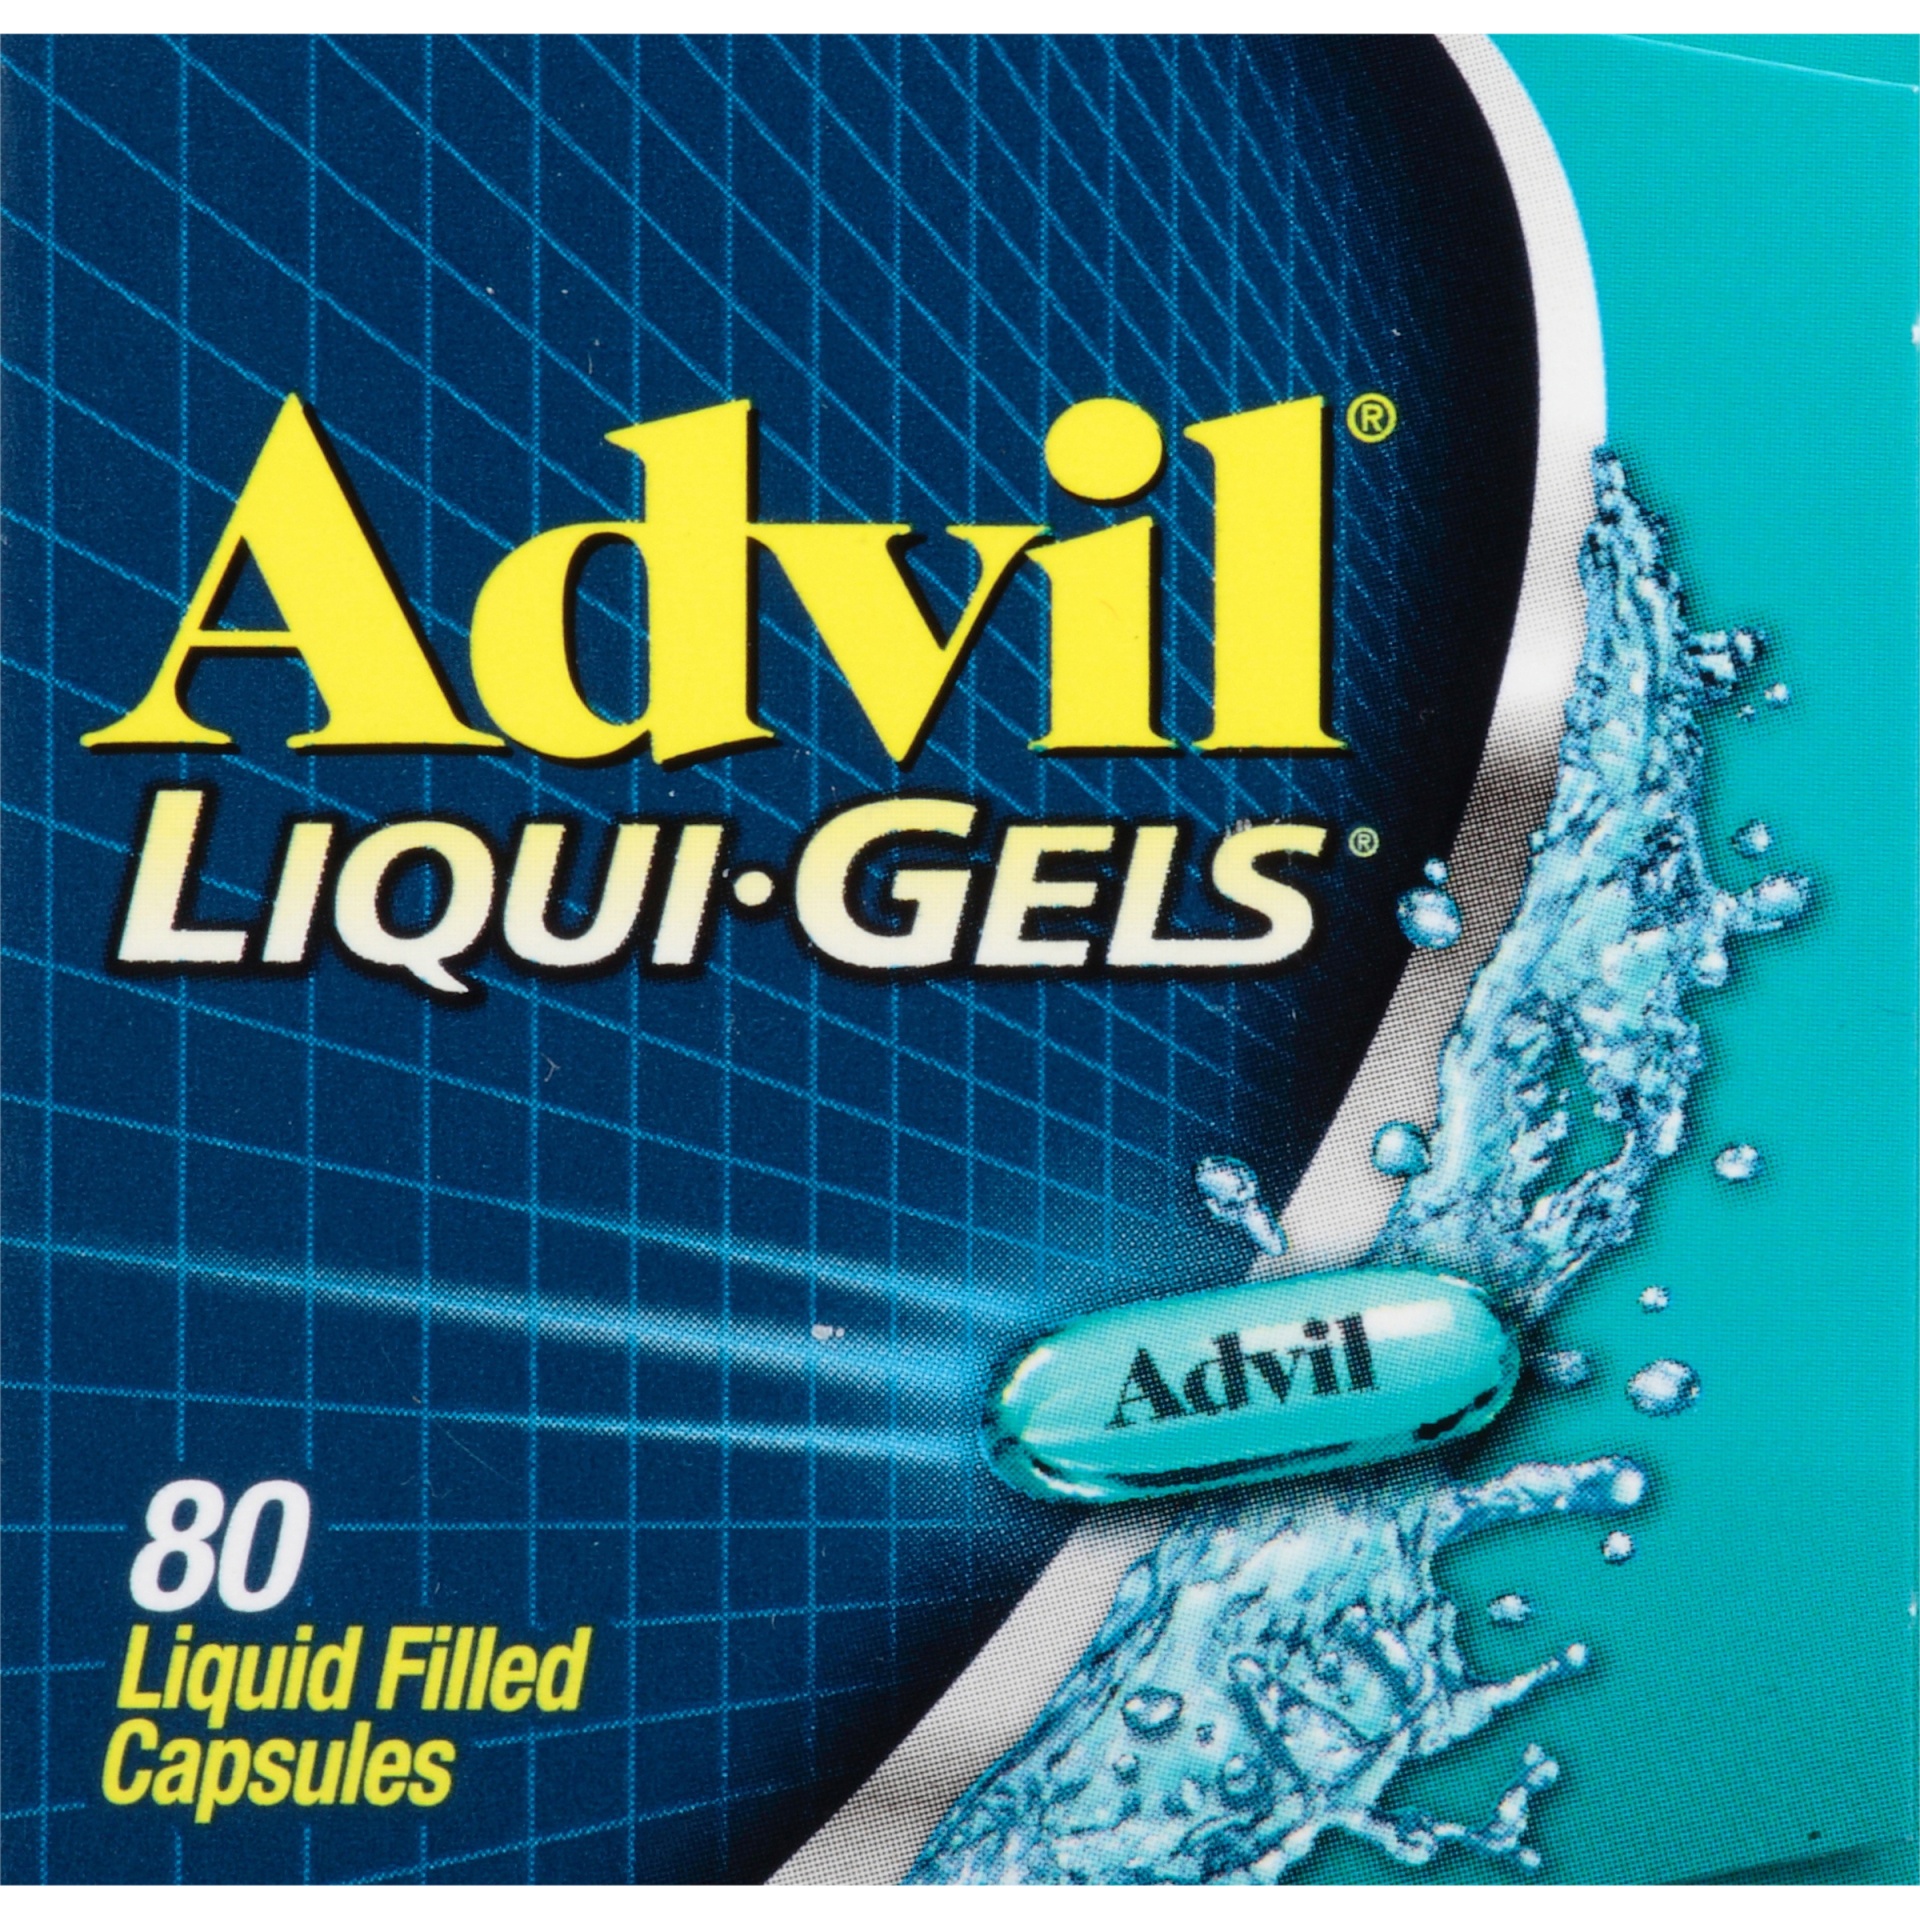 slide 5 of 7, Advil Liqui-Gels Pain Reliever and Fever Reducer, Ibuprofen 200mg for Pain Relief - 80 Liquid Filled Capsules, 80 ct